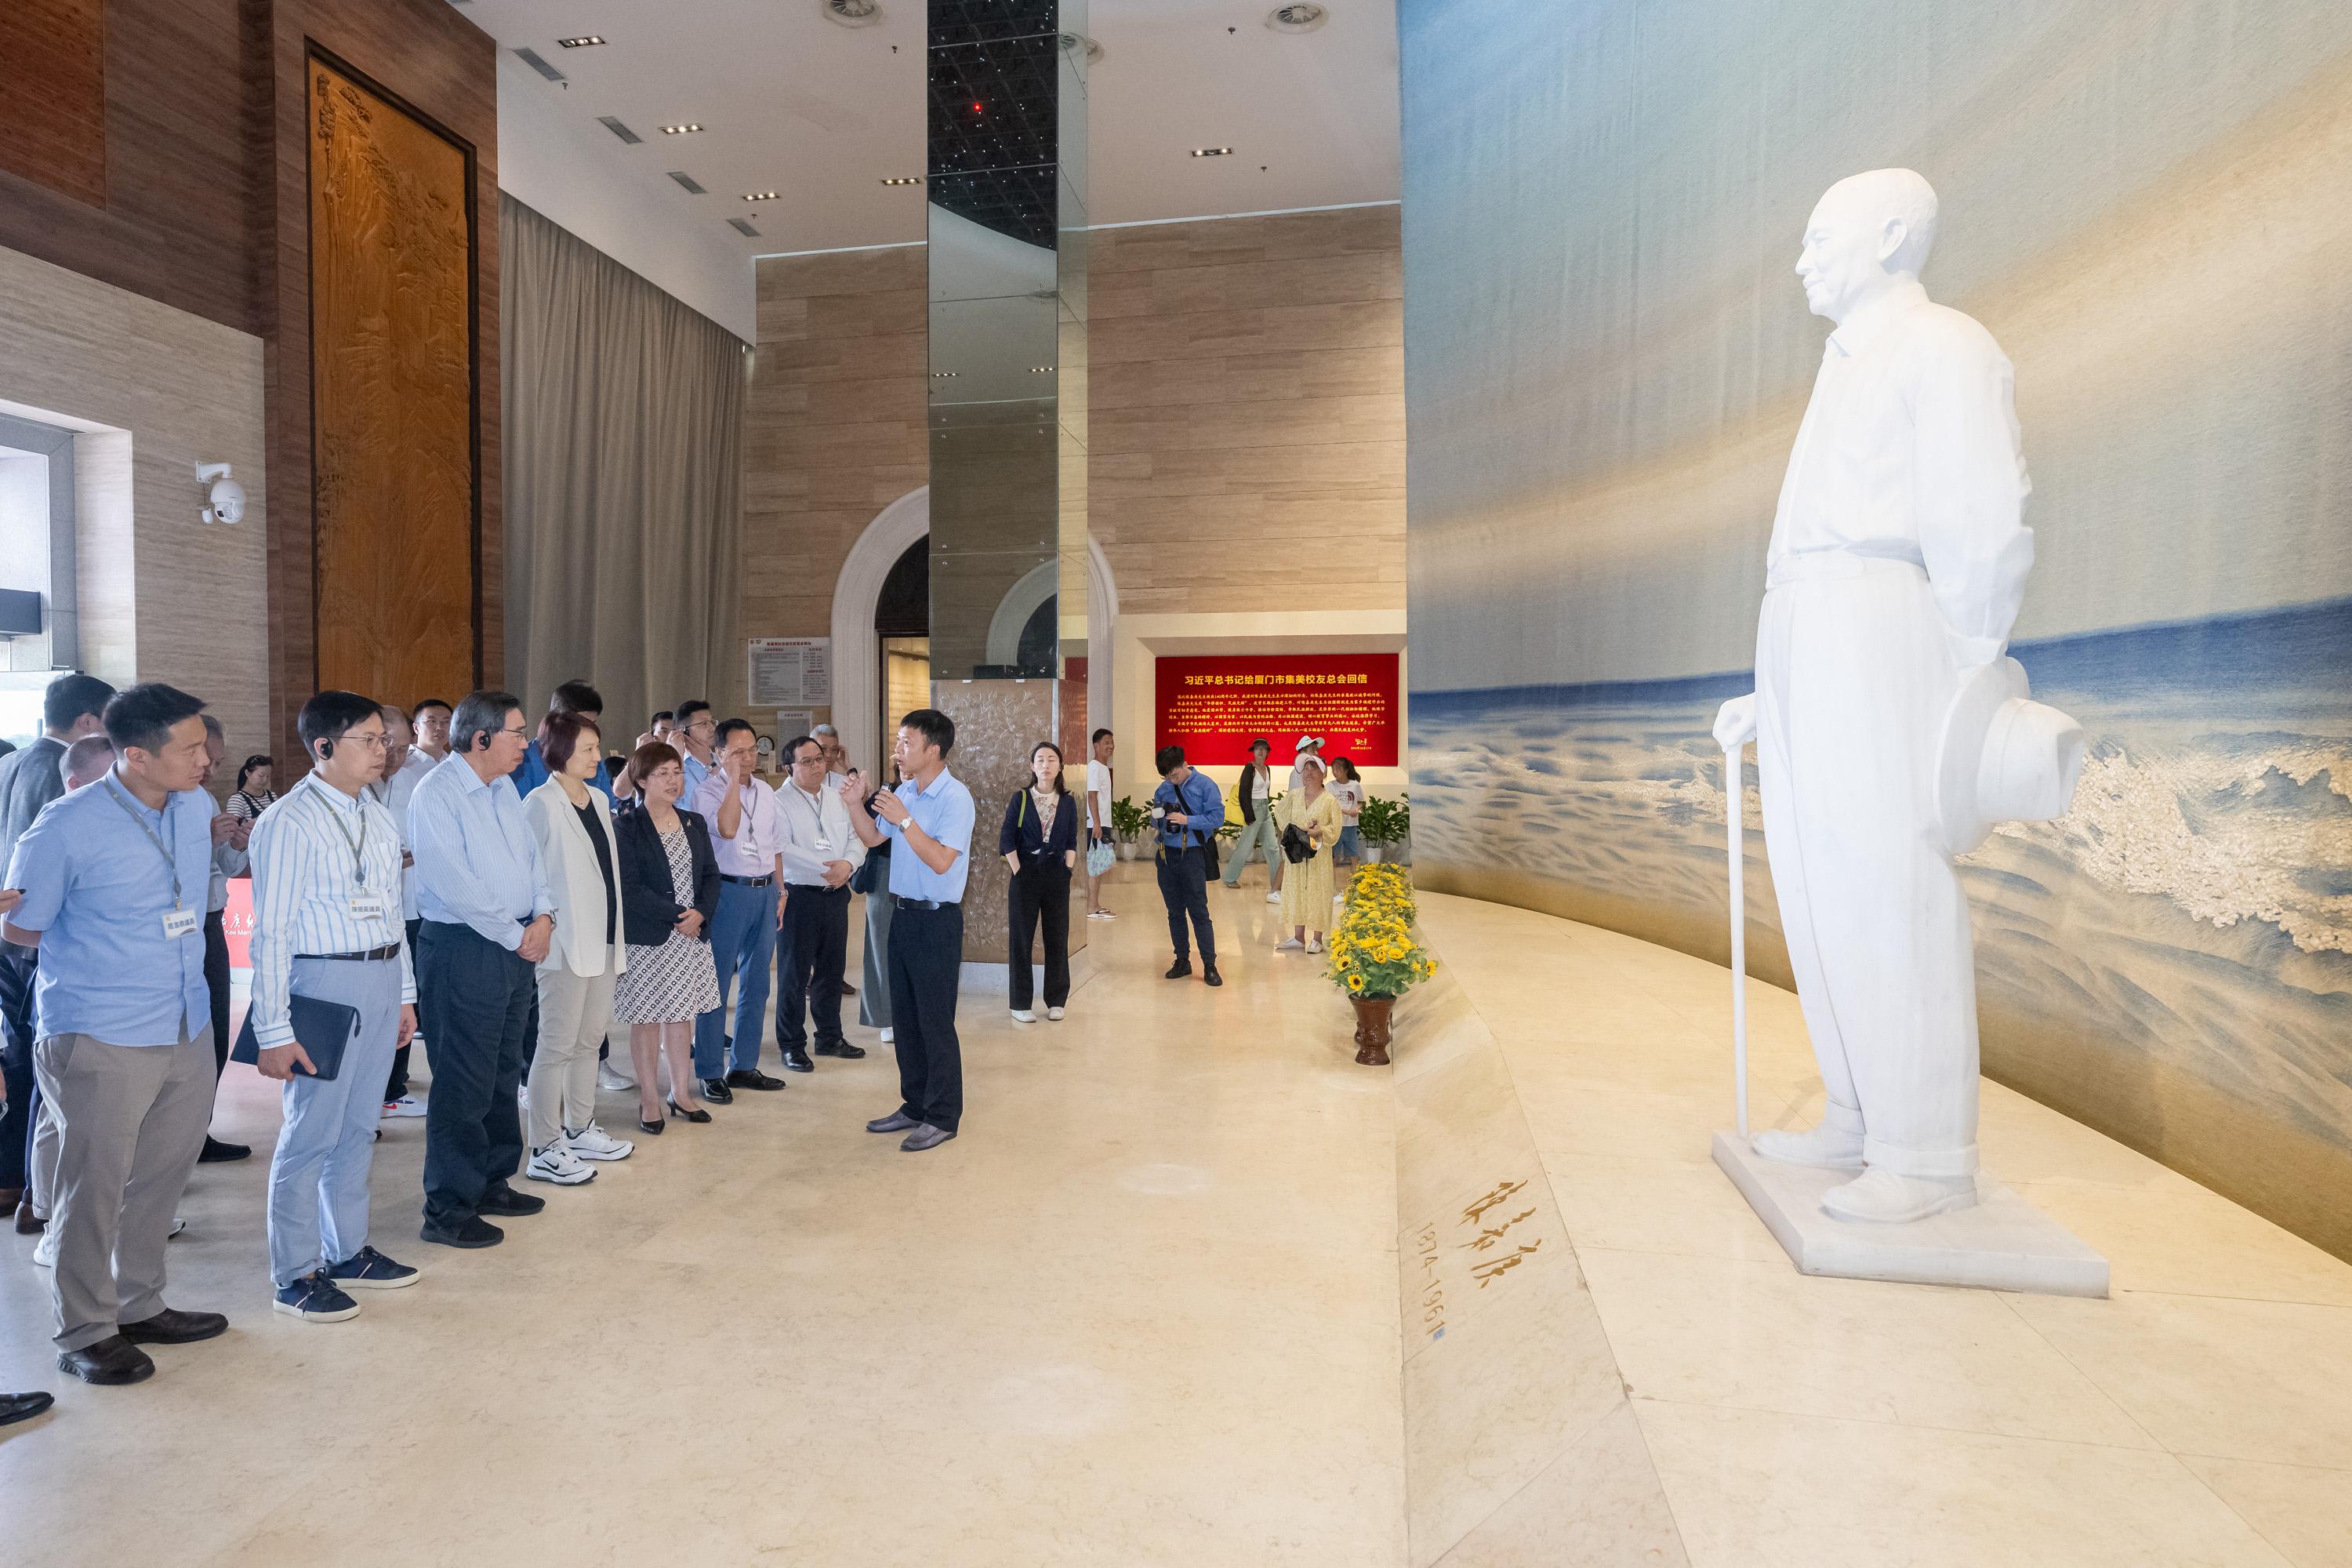 The delegation of the Legislative Council (LegCo), led by the President of LegCo, Mr Andrew Leung (third left), visits Xiamen. Photo shows the LegCo delegation visits the Tan Kah Kee Memorial Museum.
